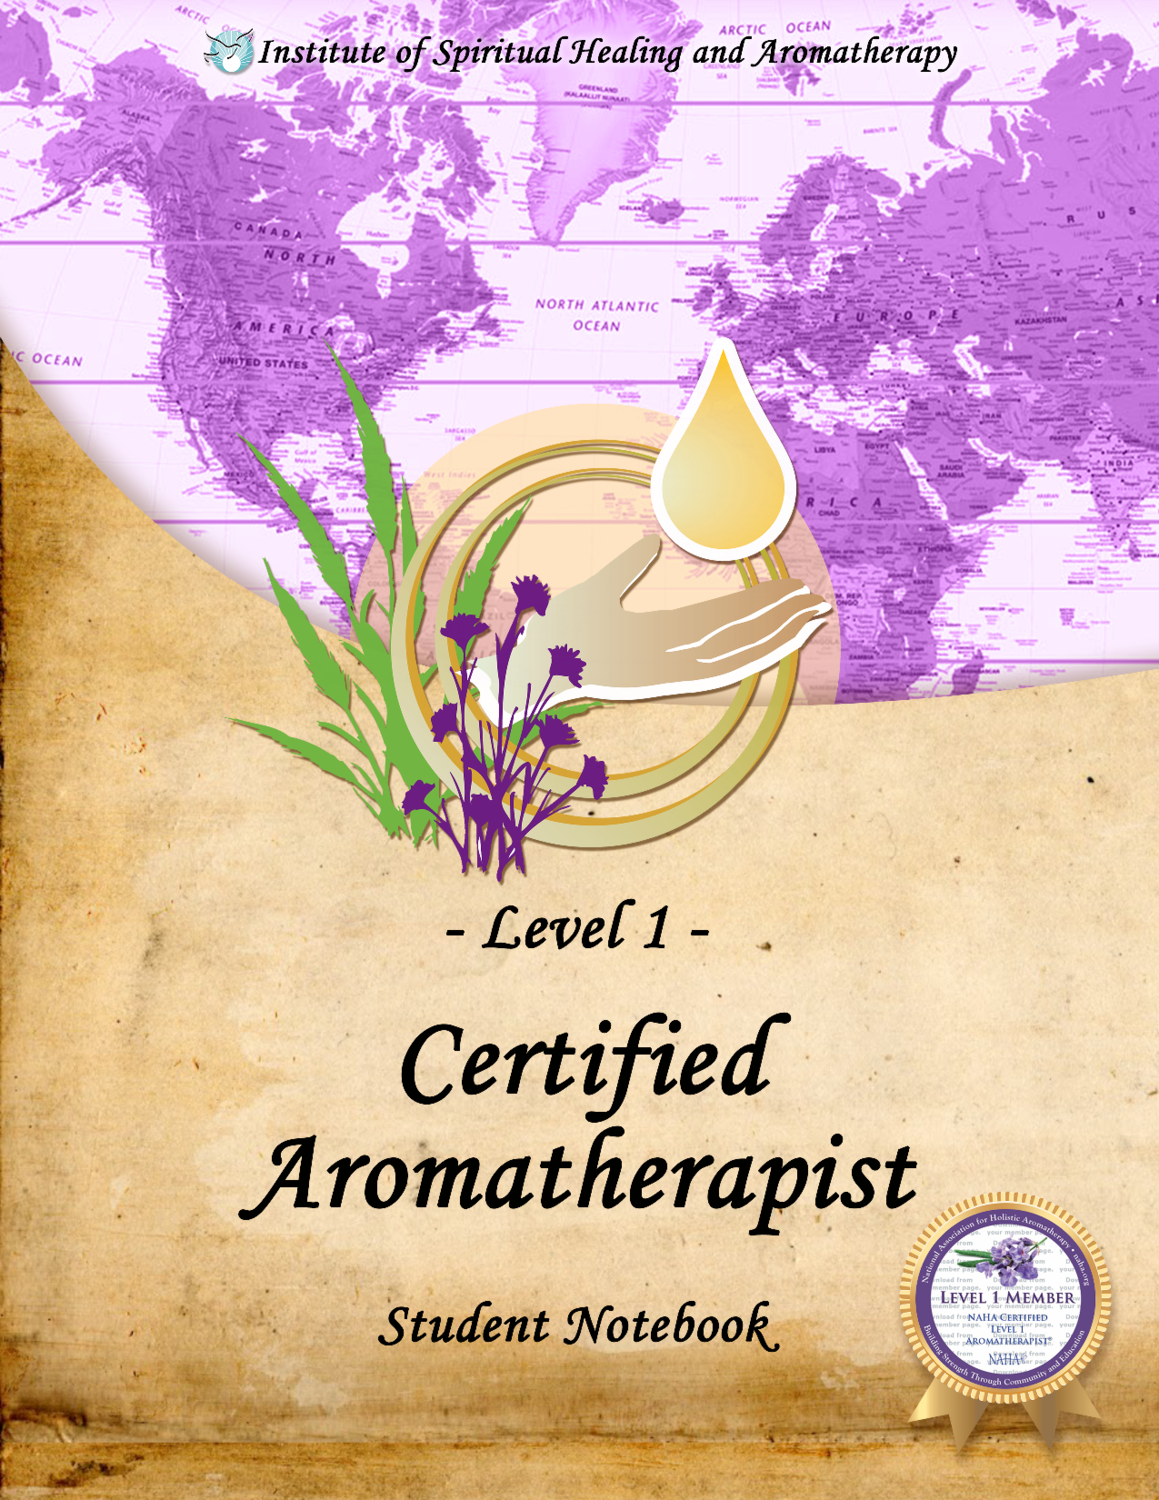 Certified Aromatherapy - Level 1 - Knoxville, TN  -February 24-26, 2023